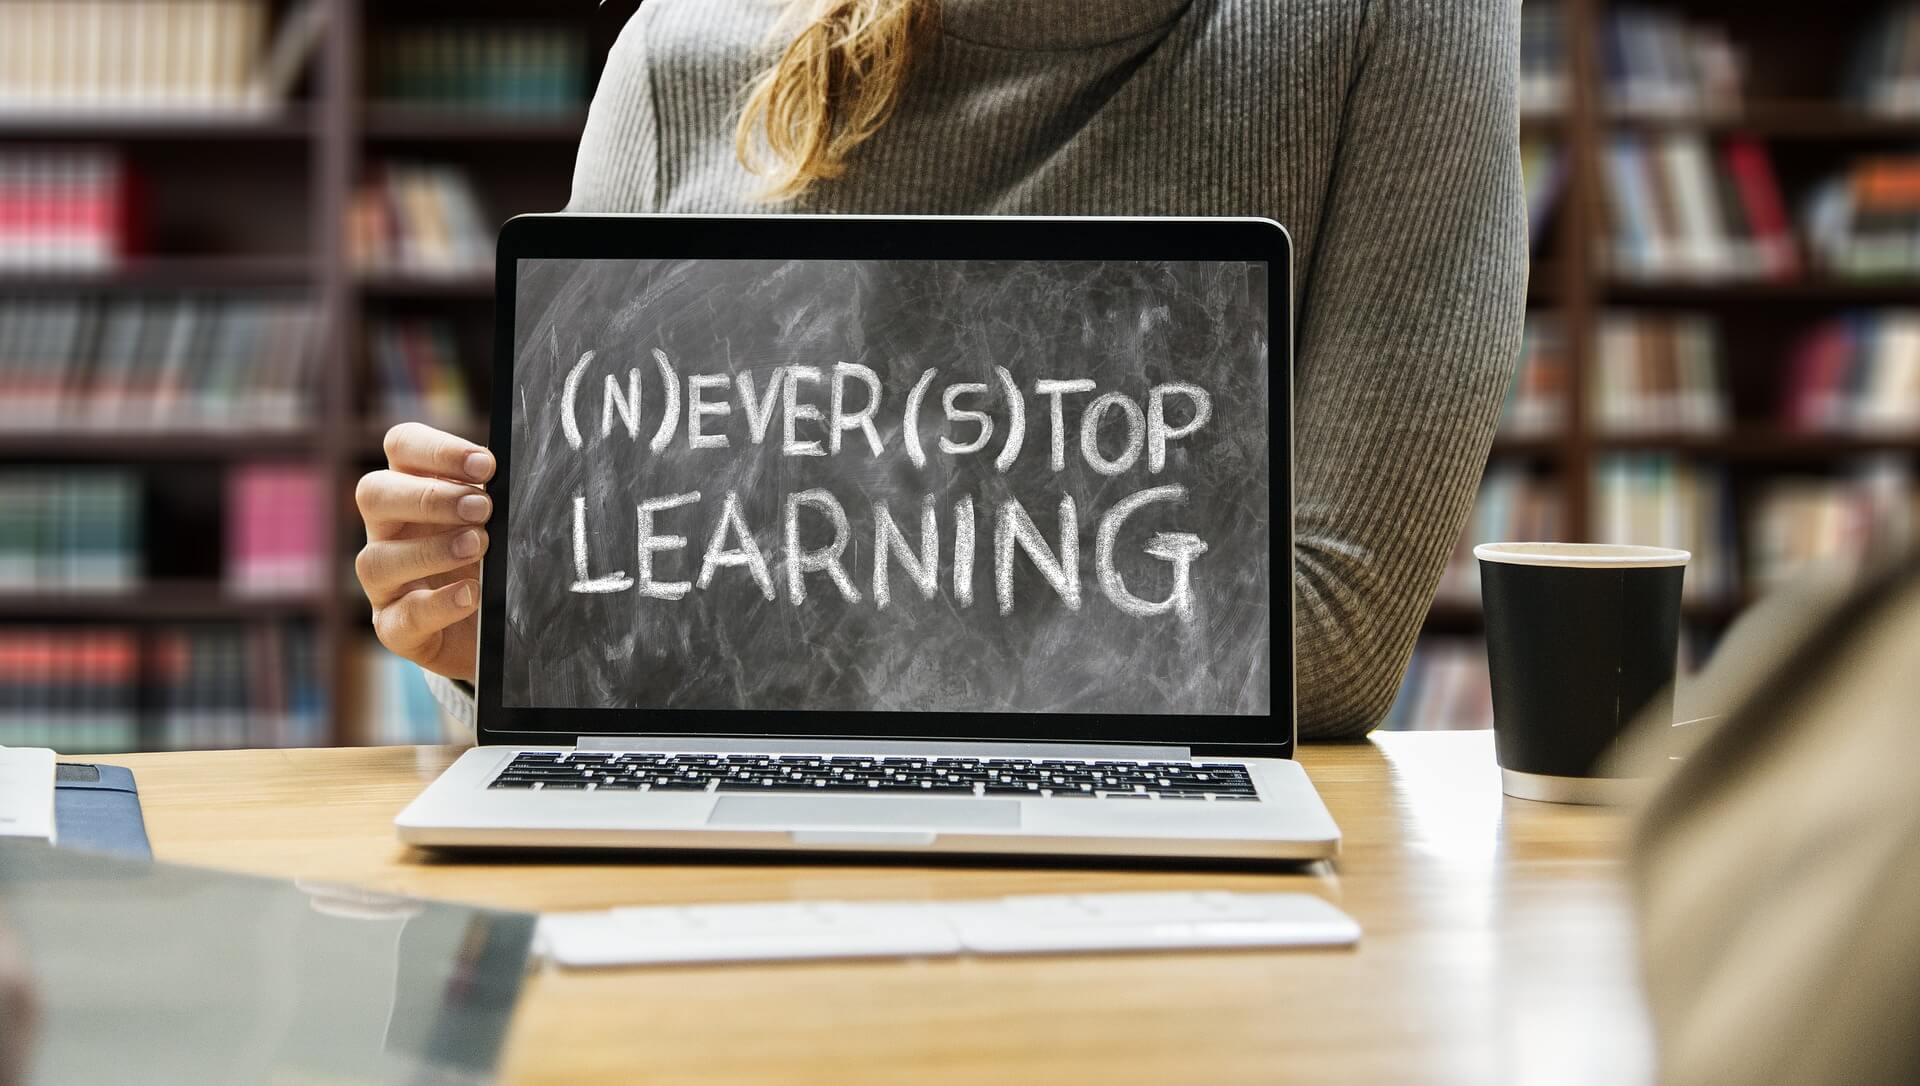 A woman is showing her laptop screen with a message saying "Never Stop Learning".